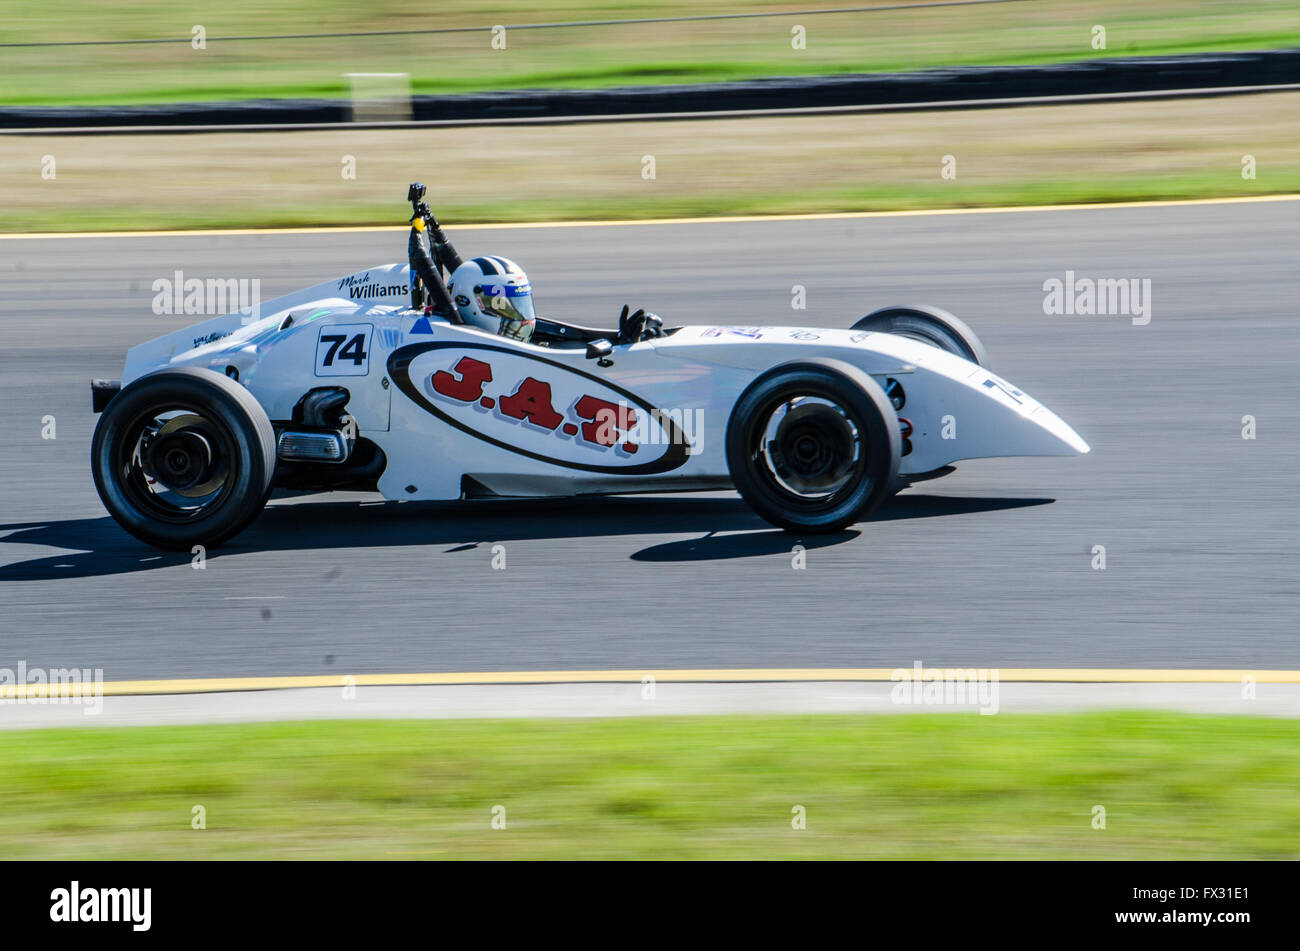 Sydney, Australia. 10th Apr, 2016. Day 2 of the New South Wales Motor Race Championships Round 2 featured a wide variety of racing including Supersports, Sports Sedans, Formula Cars, Improved Production, Formaula Vee and the Veloce Alfa. Pictured is Formula Vee racing. Credit:  Mitchell Burke/Pacific Press/Alamy Live News Stock Photo